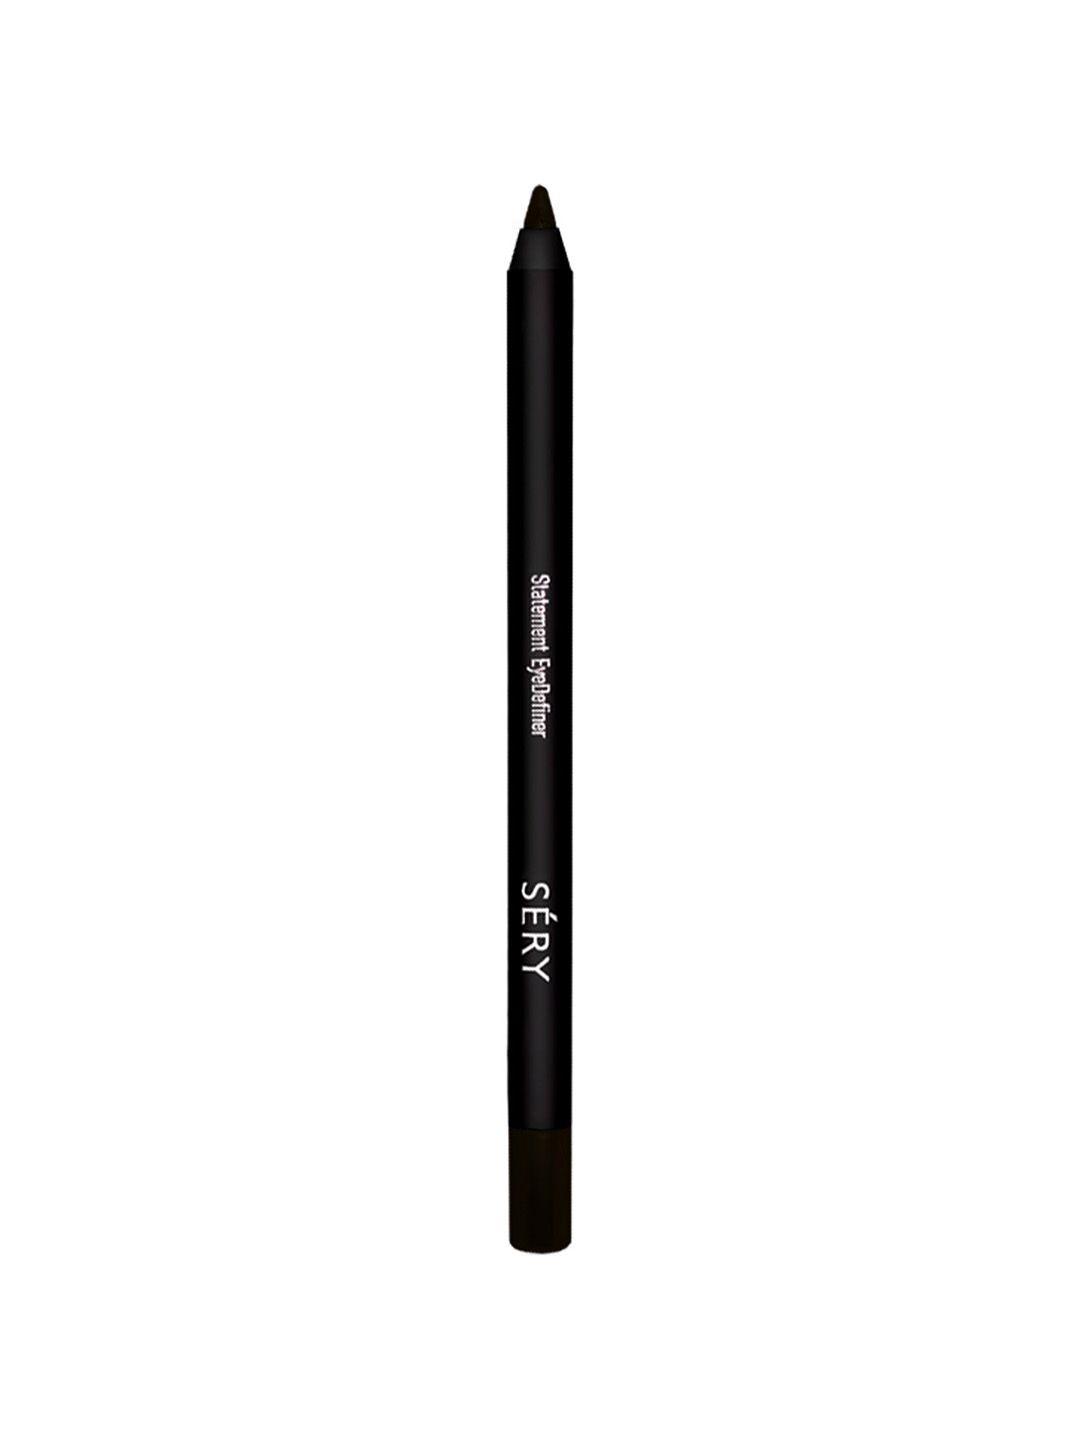 sery statement 24 hours stay gel finish eyeliner 1.2 g - too black ep05